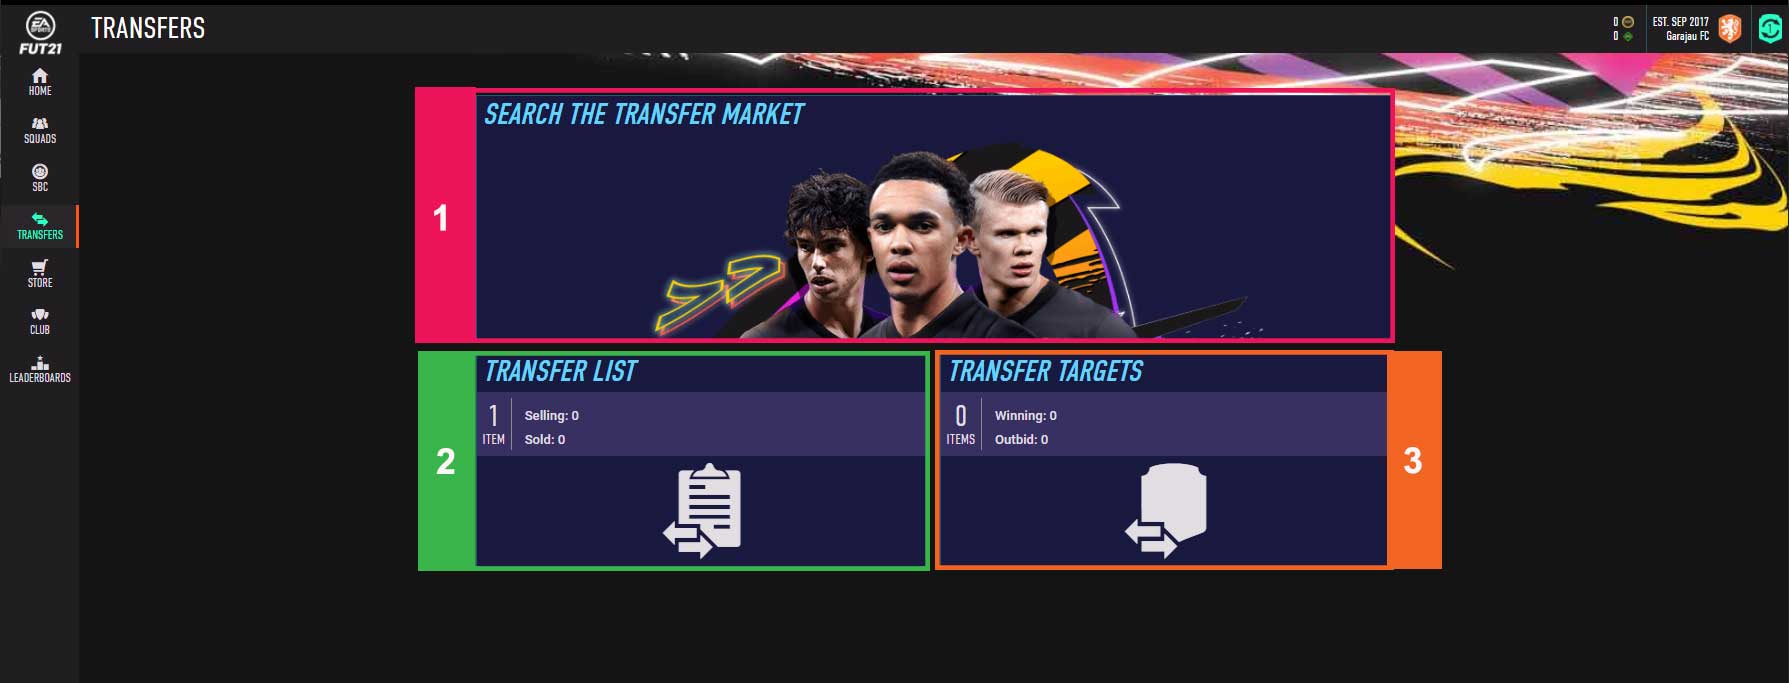 When is the FIFA 21 Web App coming out? FUT Companion App - Dexerto